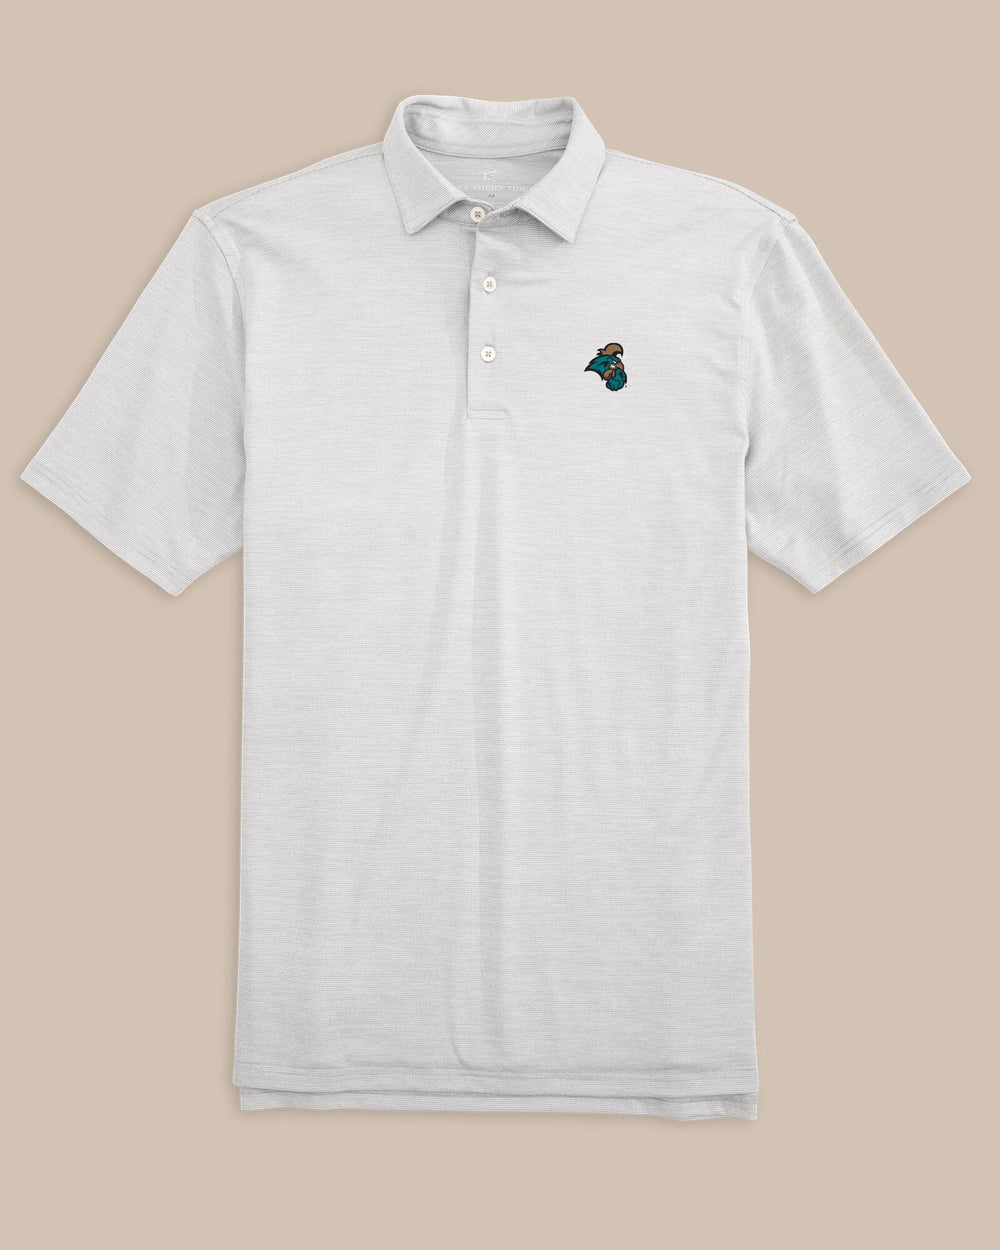 The front view of the Coastal Carolina Chanticleers Driver Spacedye Polo Shirt by Southern Tide - Slate Grey